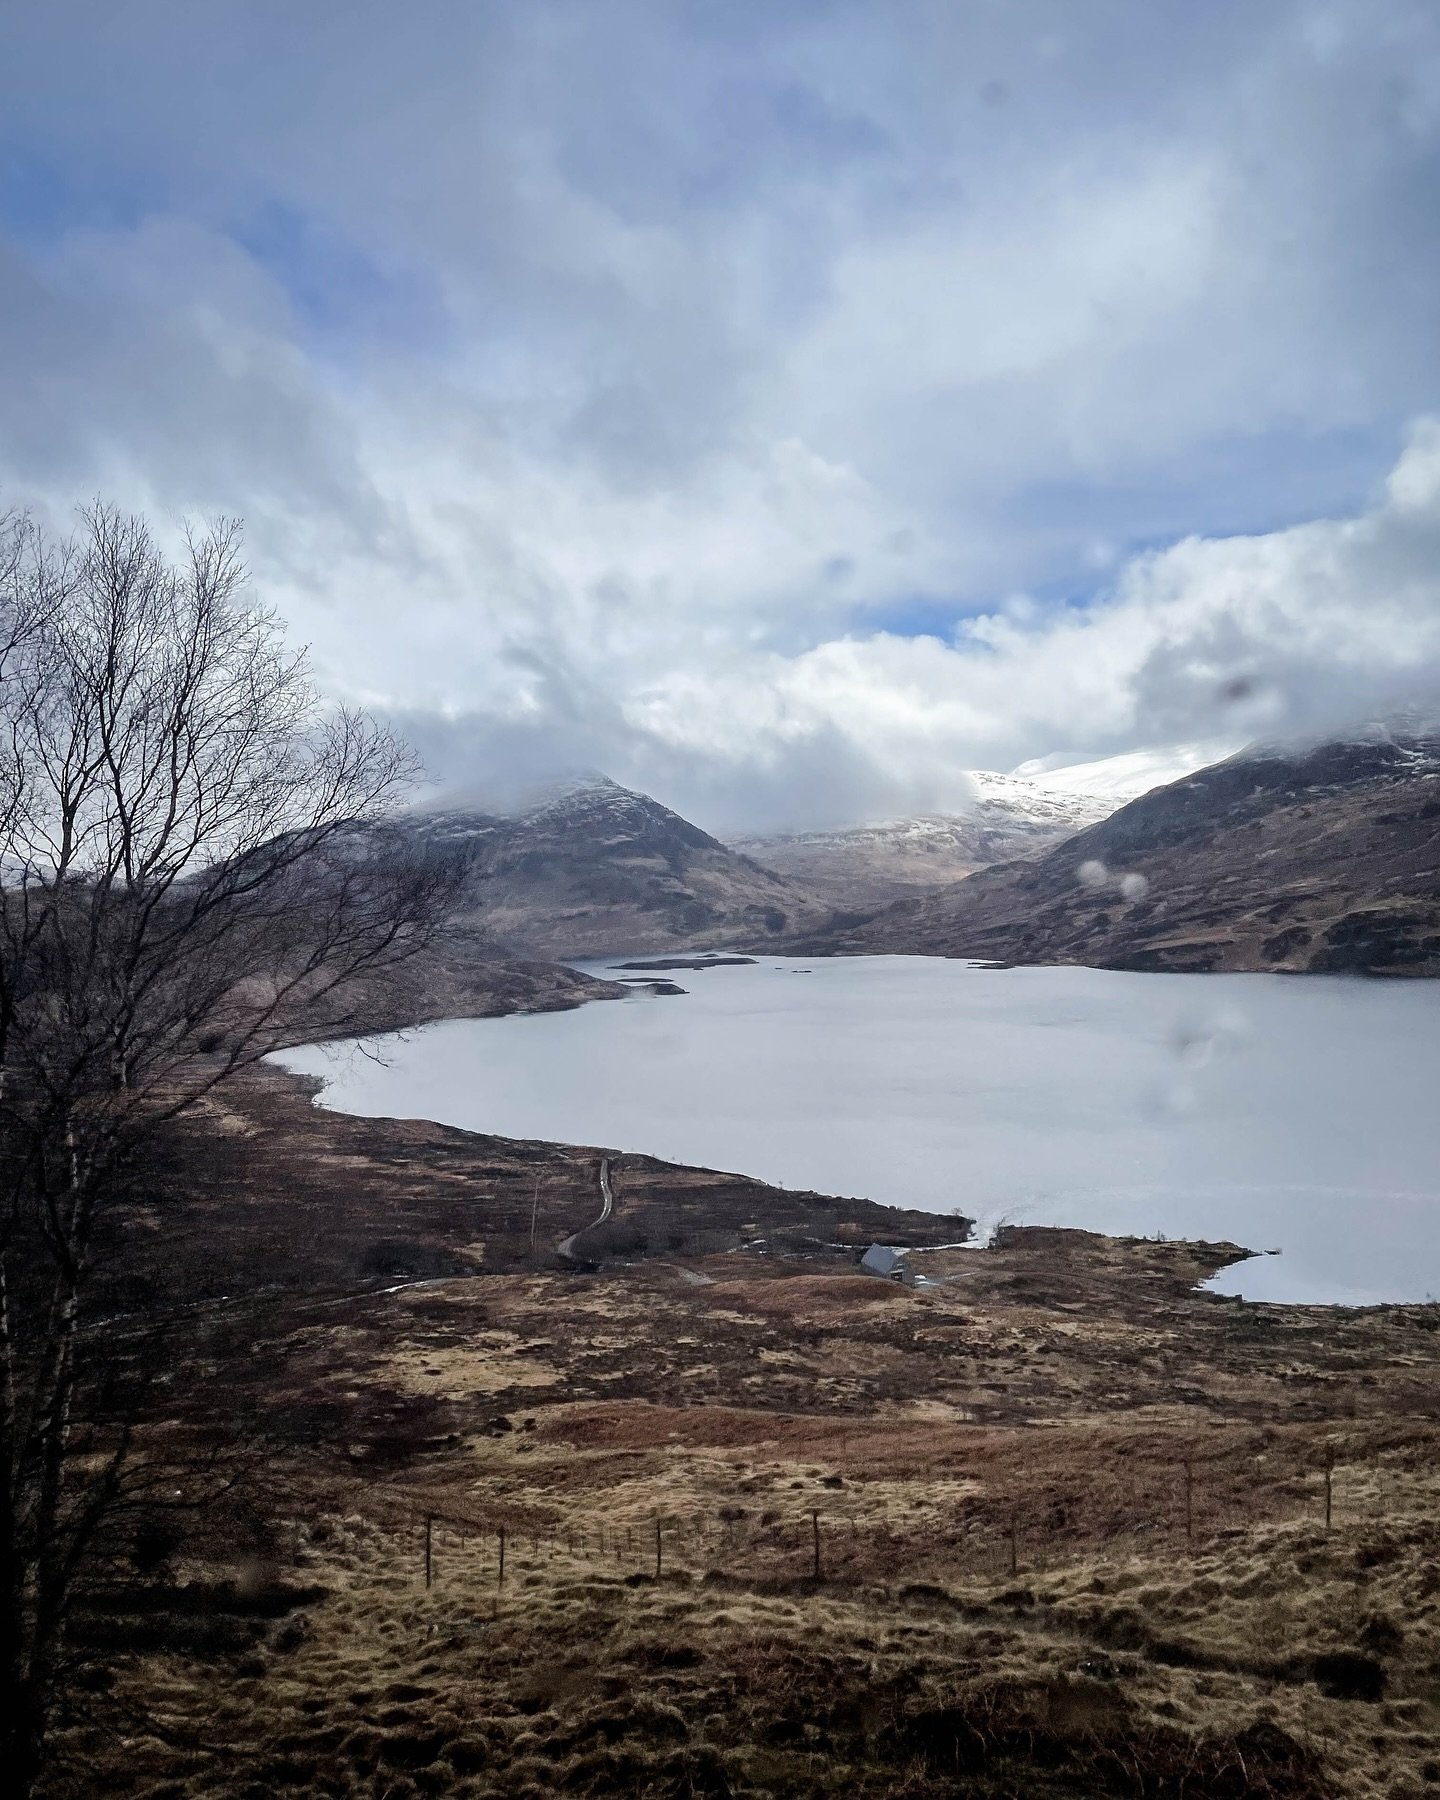 Loch Treig 🌫️

Also know as the &ldquo;Lonely Loch&rdquo; according to Ken, the hermit of Treig who lives in a cabin in the woods on the banks of the loch🪵

We&rsquo;re back in the Scottish Highlands on the overnight @caledoniansleeper after a few 